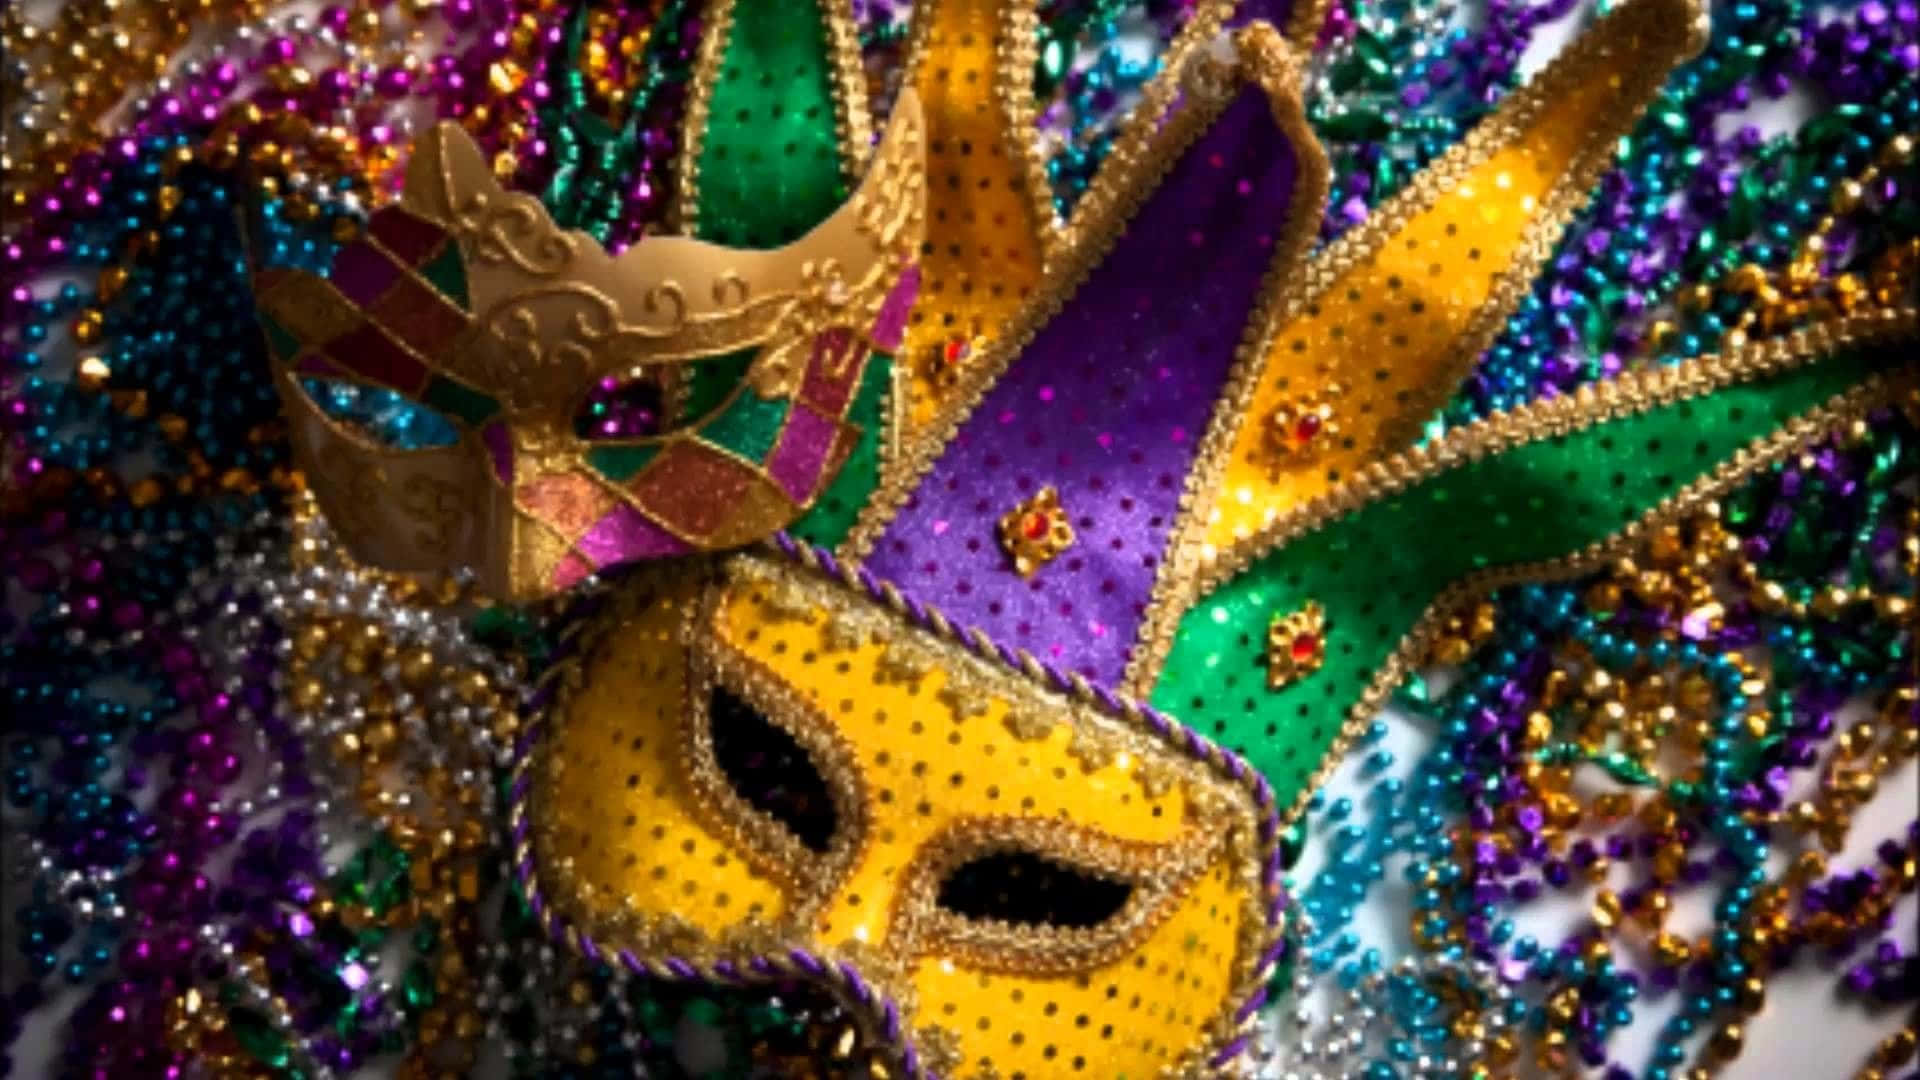 Mardi Gras Masks And Beads On A Table Wallpaper